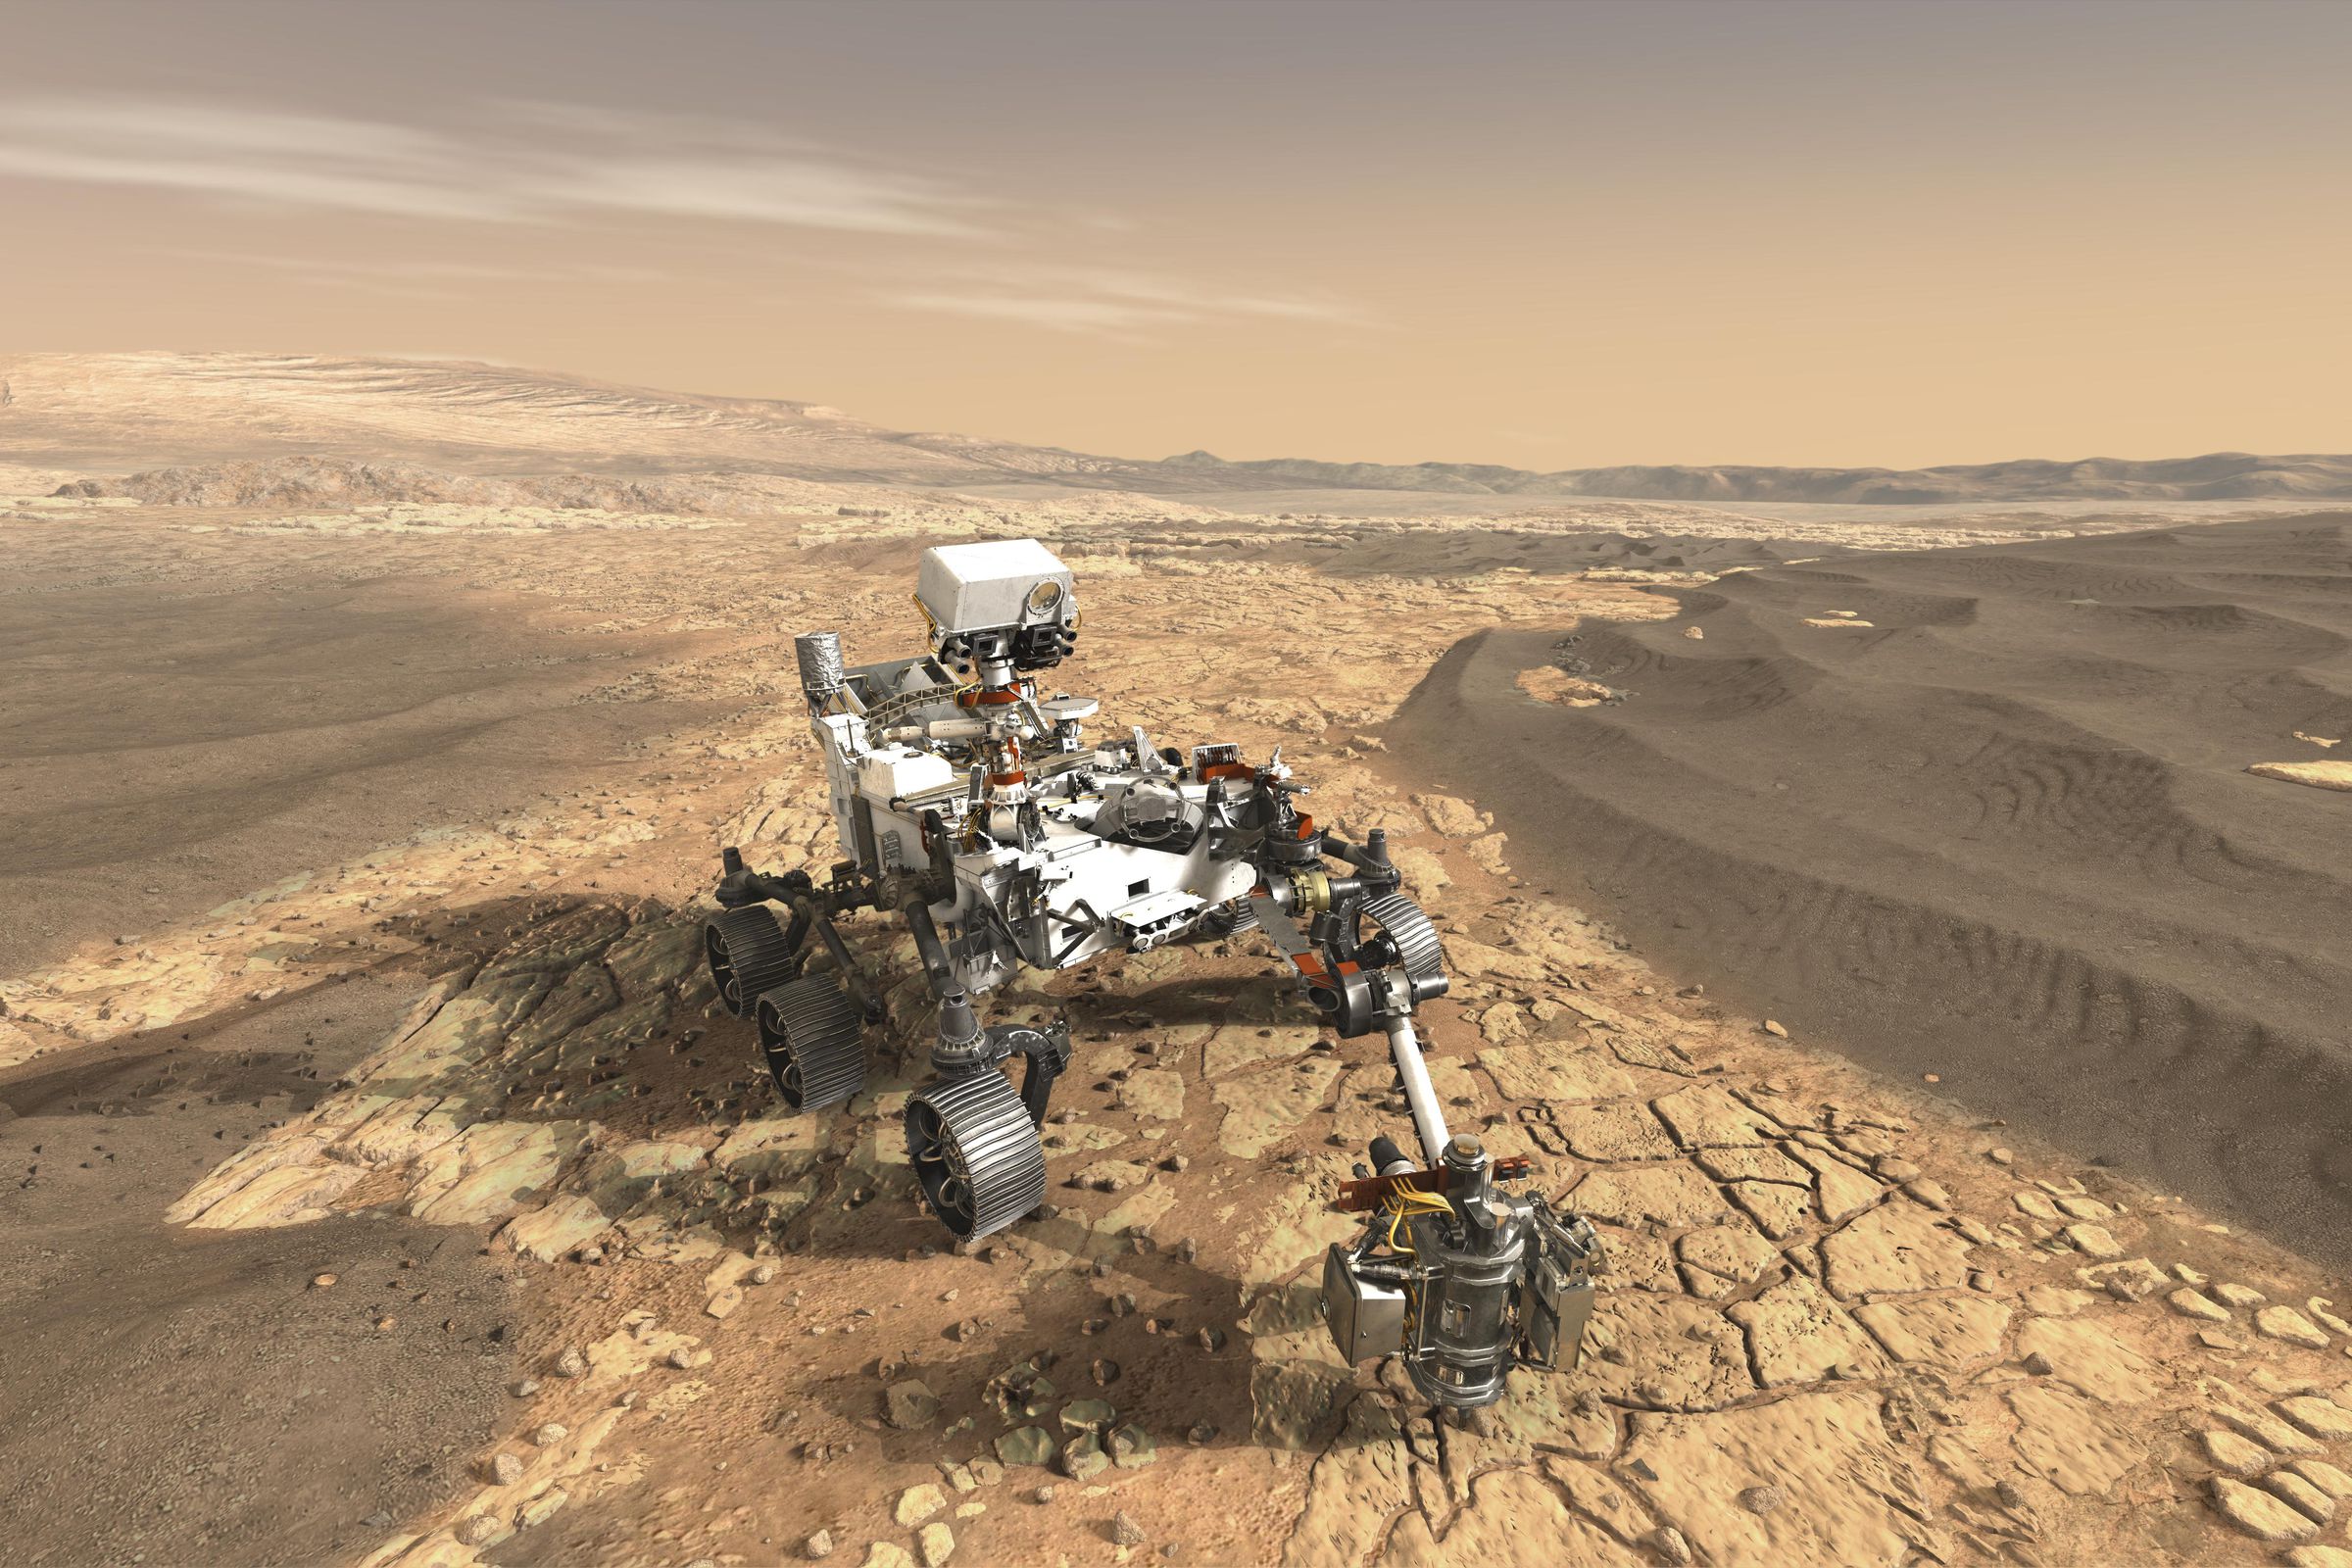 An artistic rendering of the Mars 2020 rover on the Martian surface.